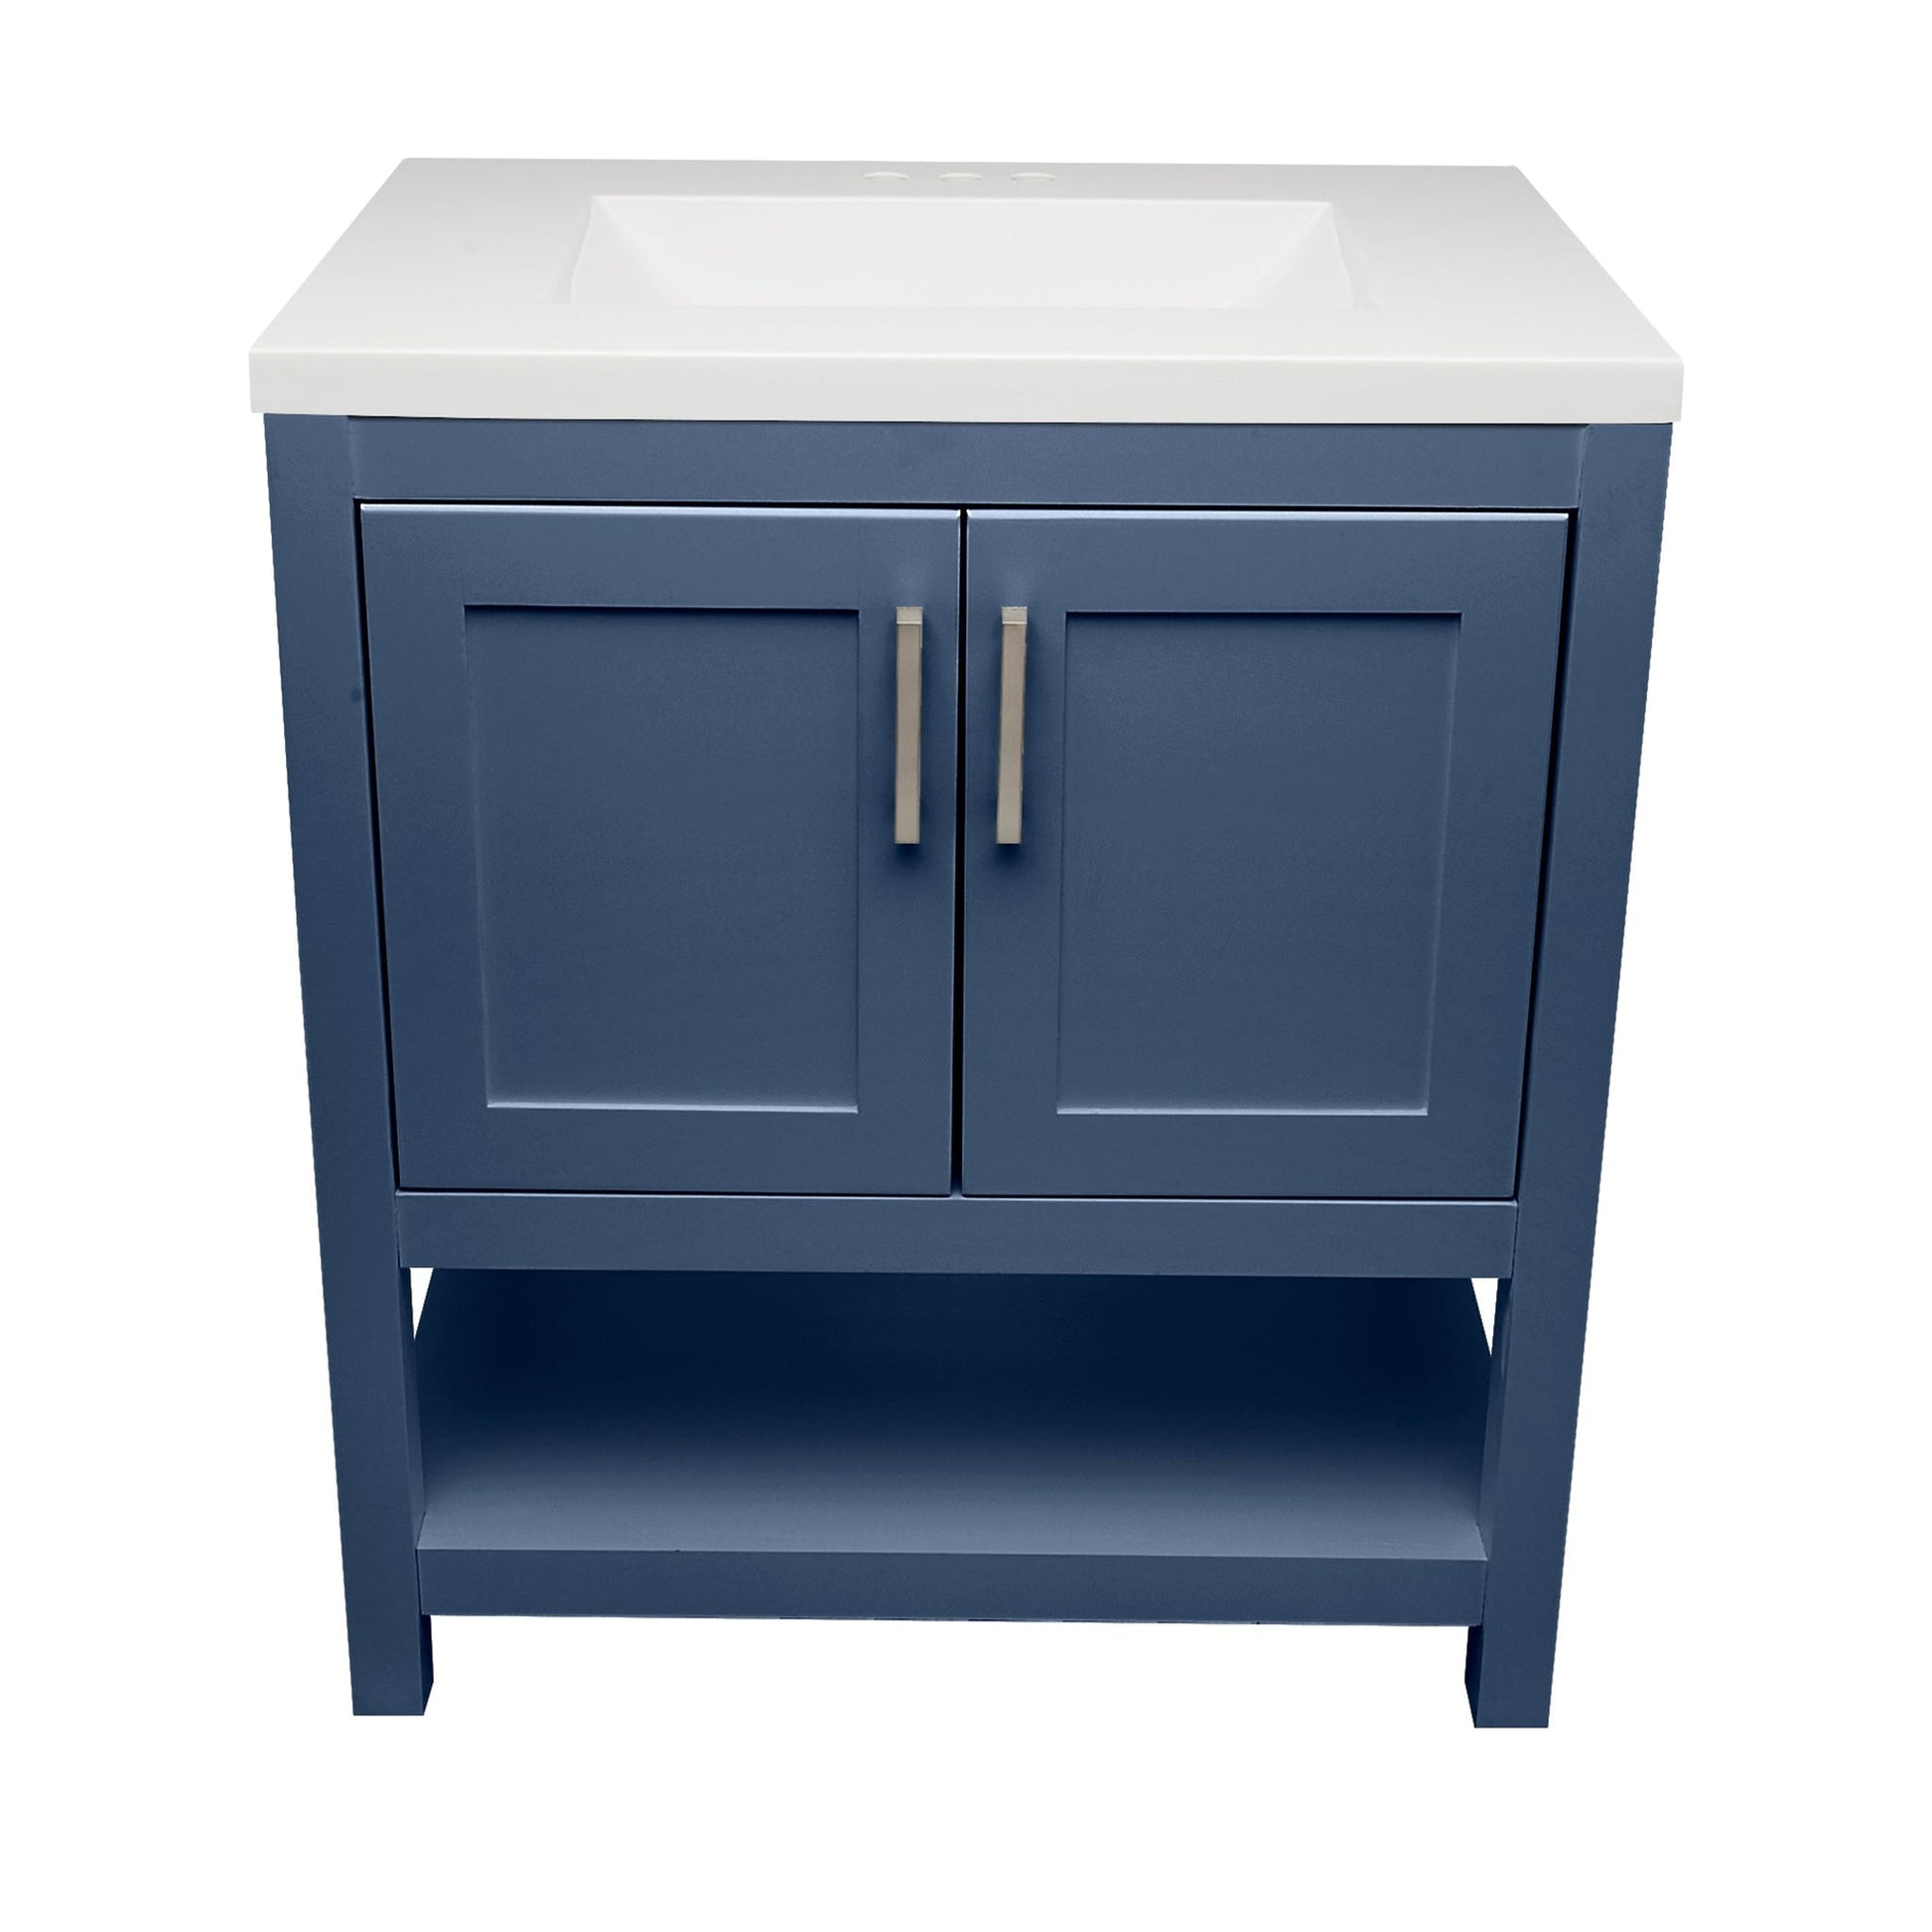 Ella's Bubbles Taos 31" Navy Blue Bathroom Vanity With White Cultured Marble Top and Sink